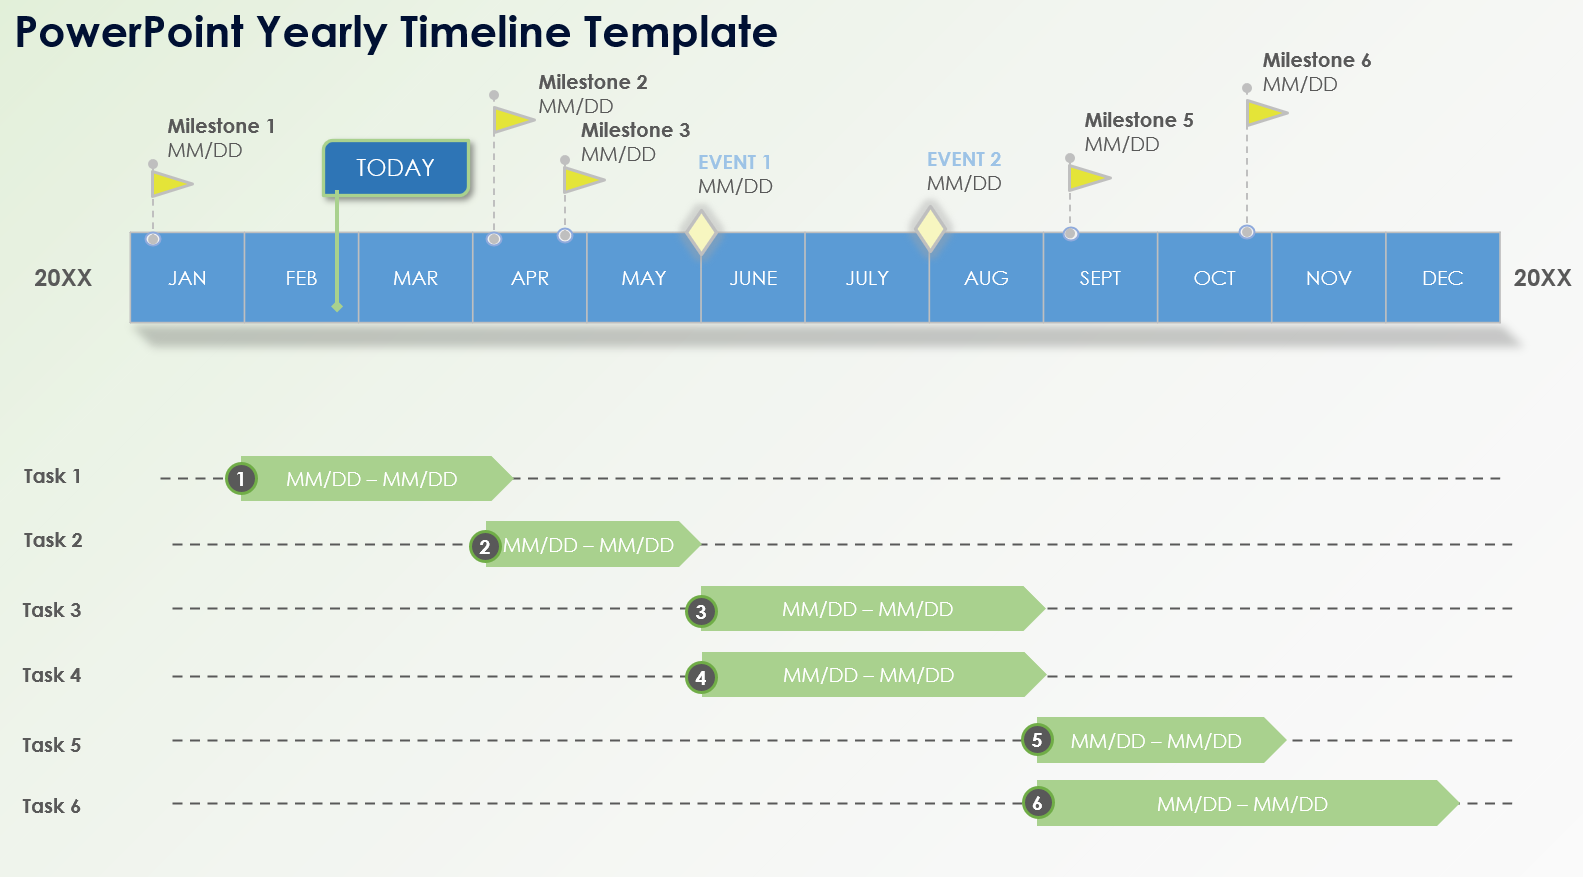 PowerPoint Yearly Timeline Template